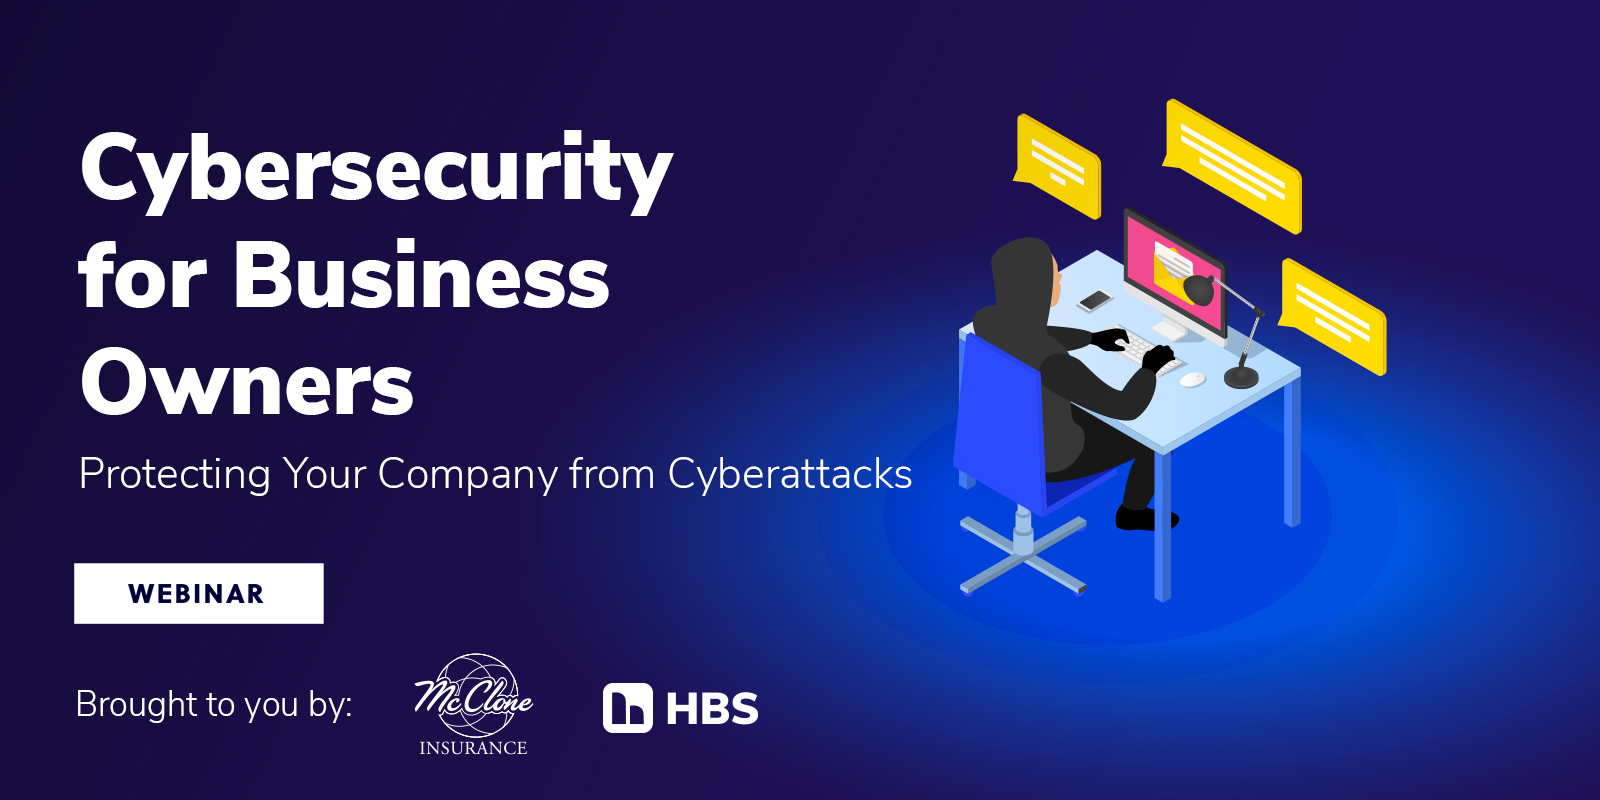 Cybersecurity for Business Owners Webinar